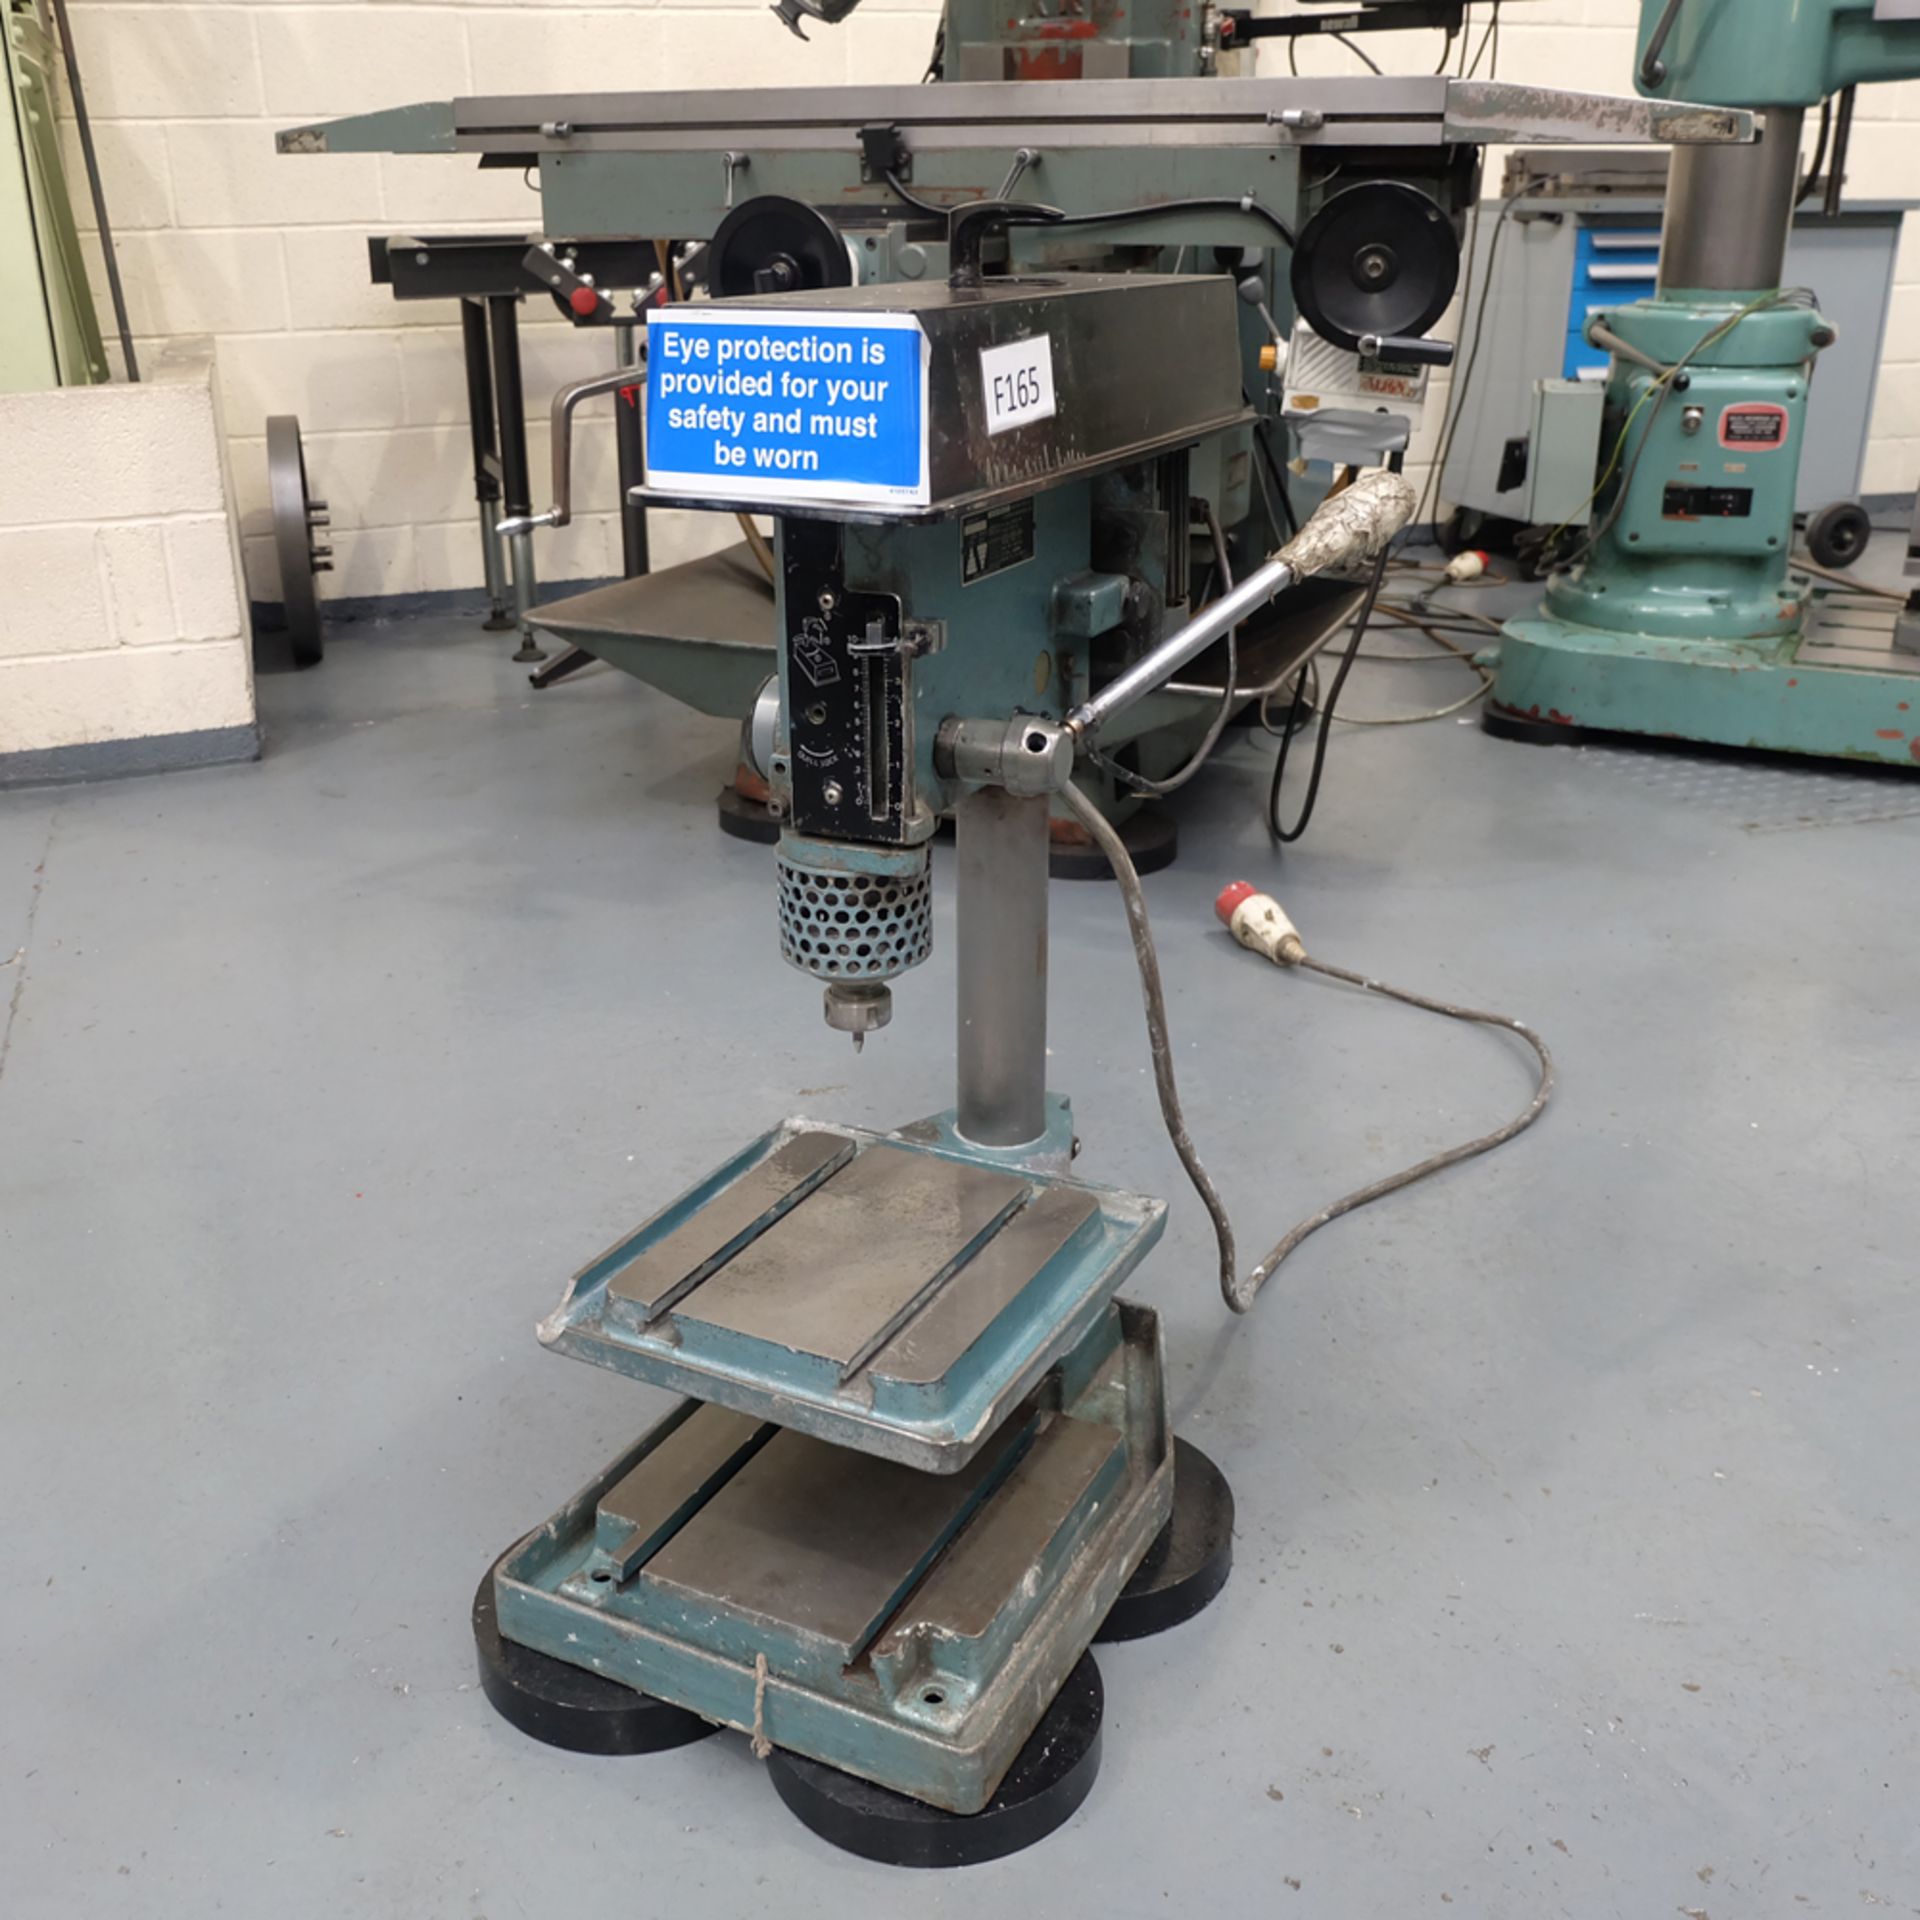 Meddings LF2 Bench Drill. 5 x Spindle Speeds 500 - 4000rpm. Table Size 10" x 11". Motor 3 Phase. - Image 2 of 5